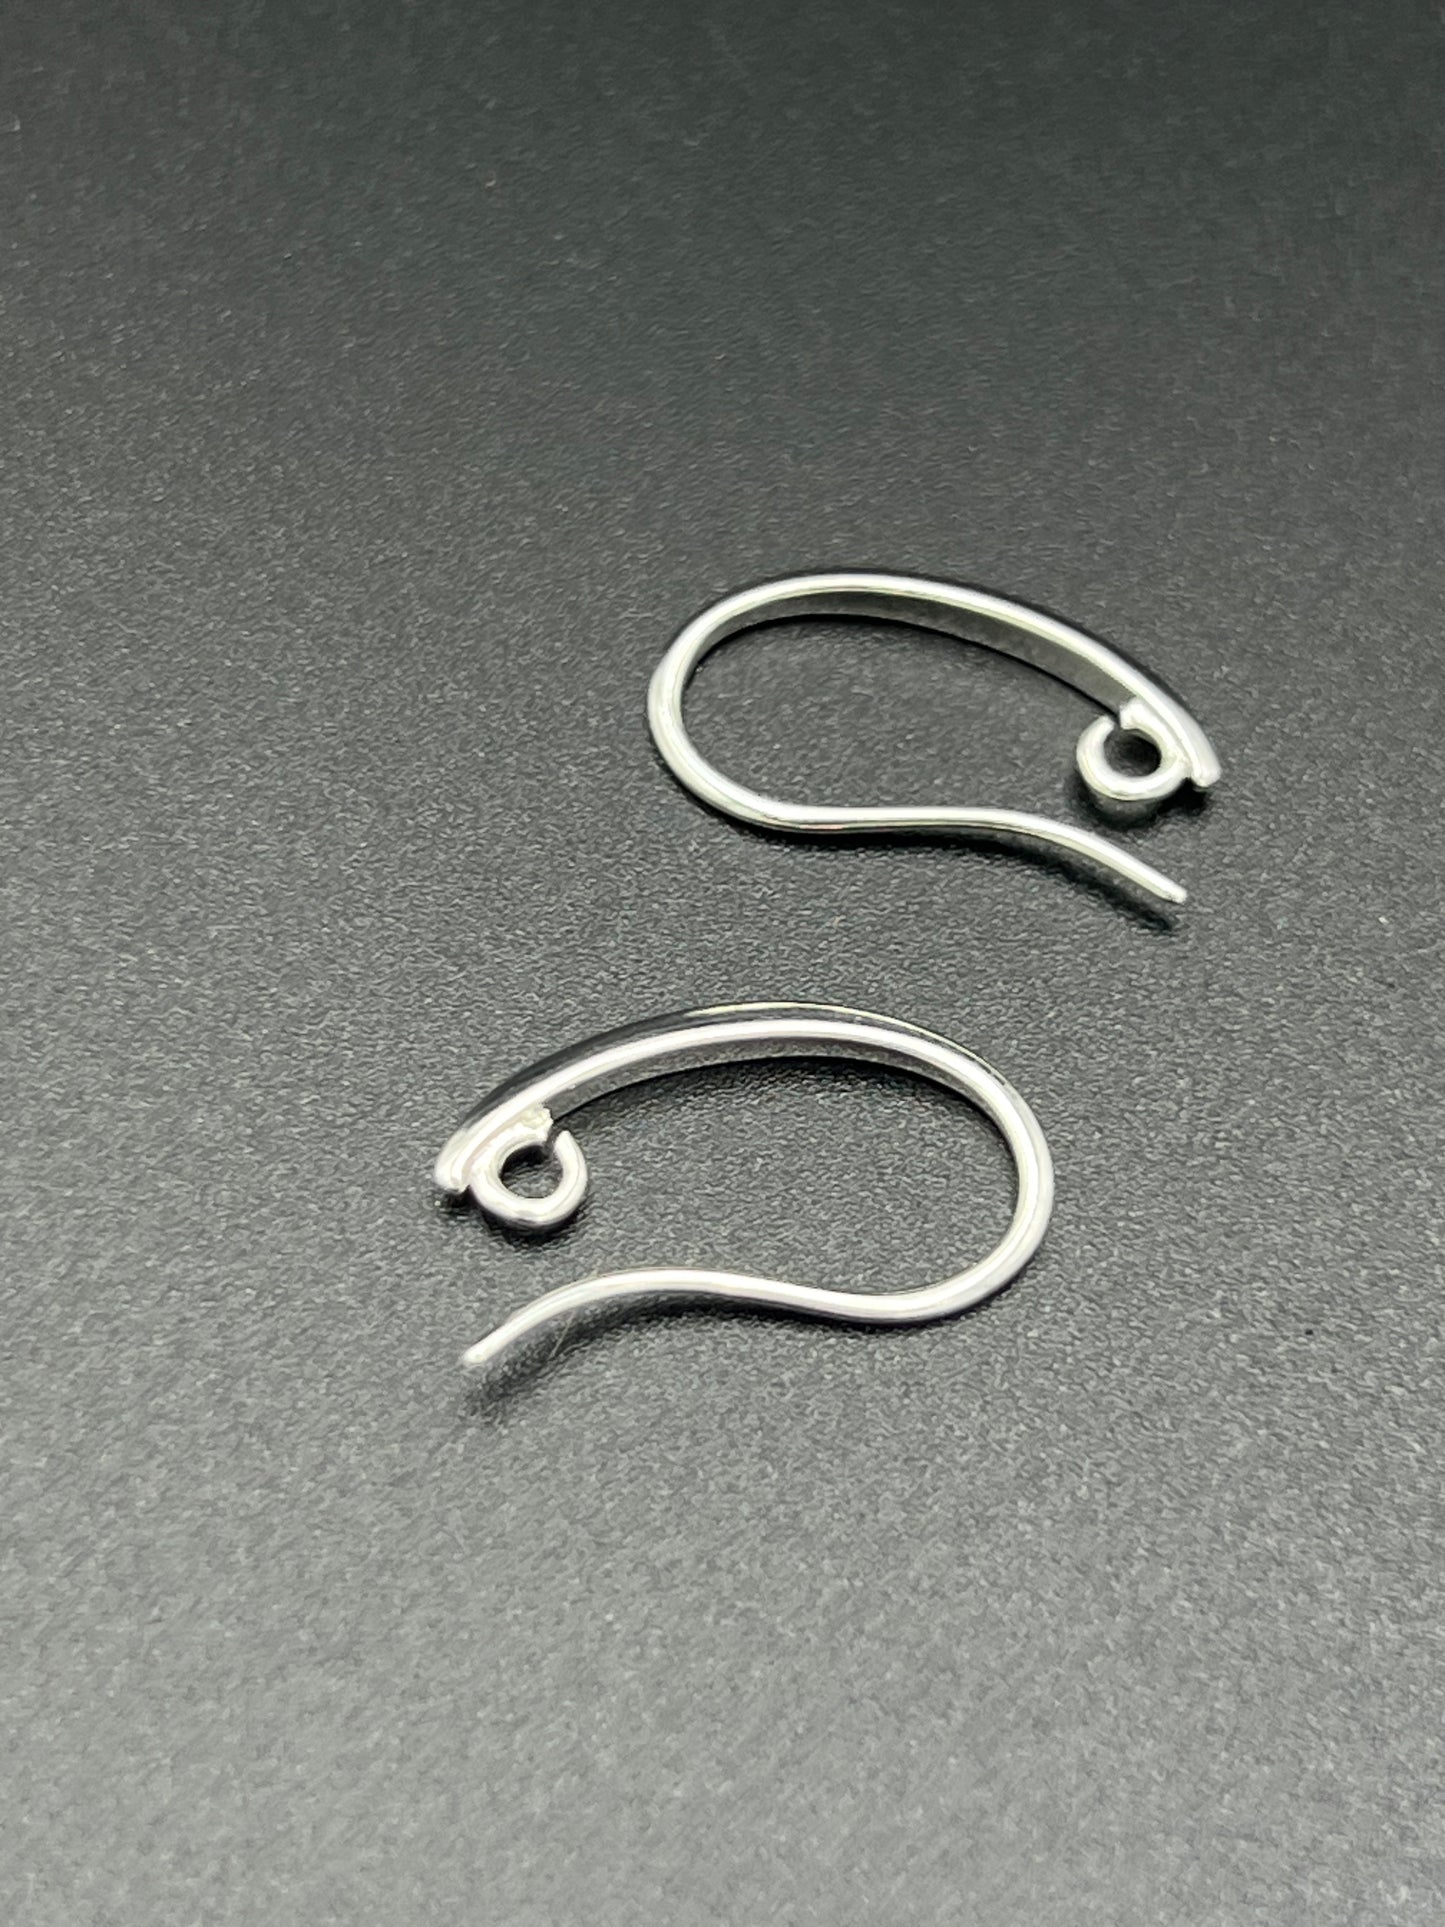 19x11mm Silver Plated Earwire with 2mm Open Ring 36 Pack